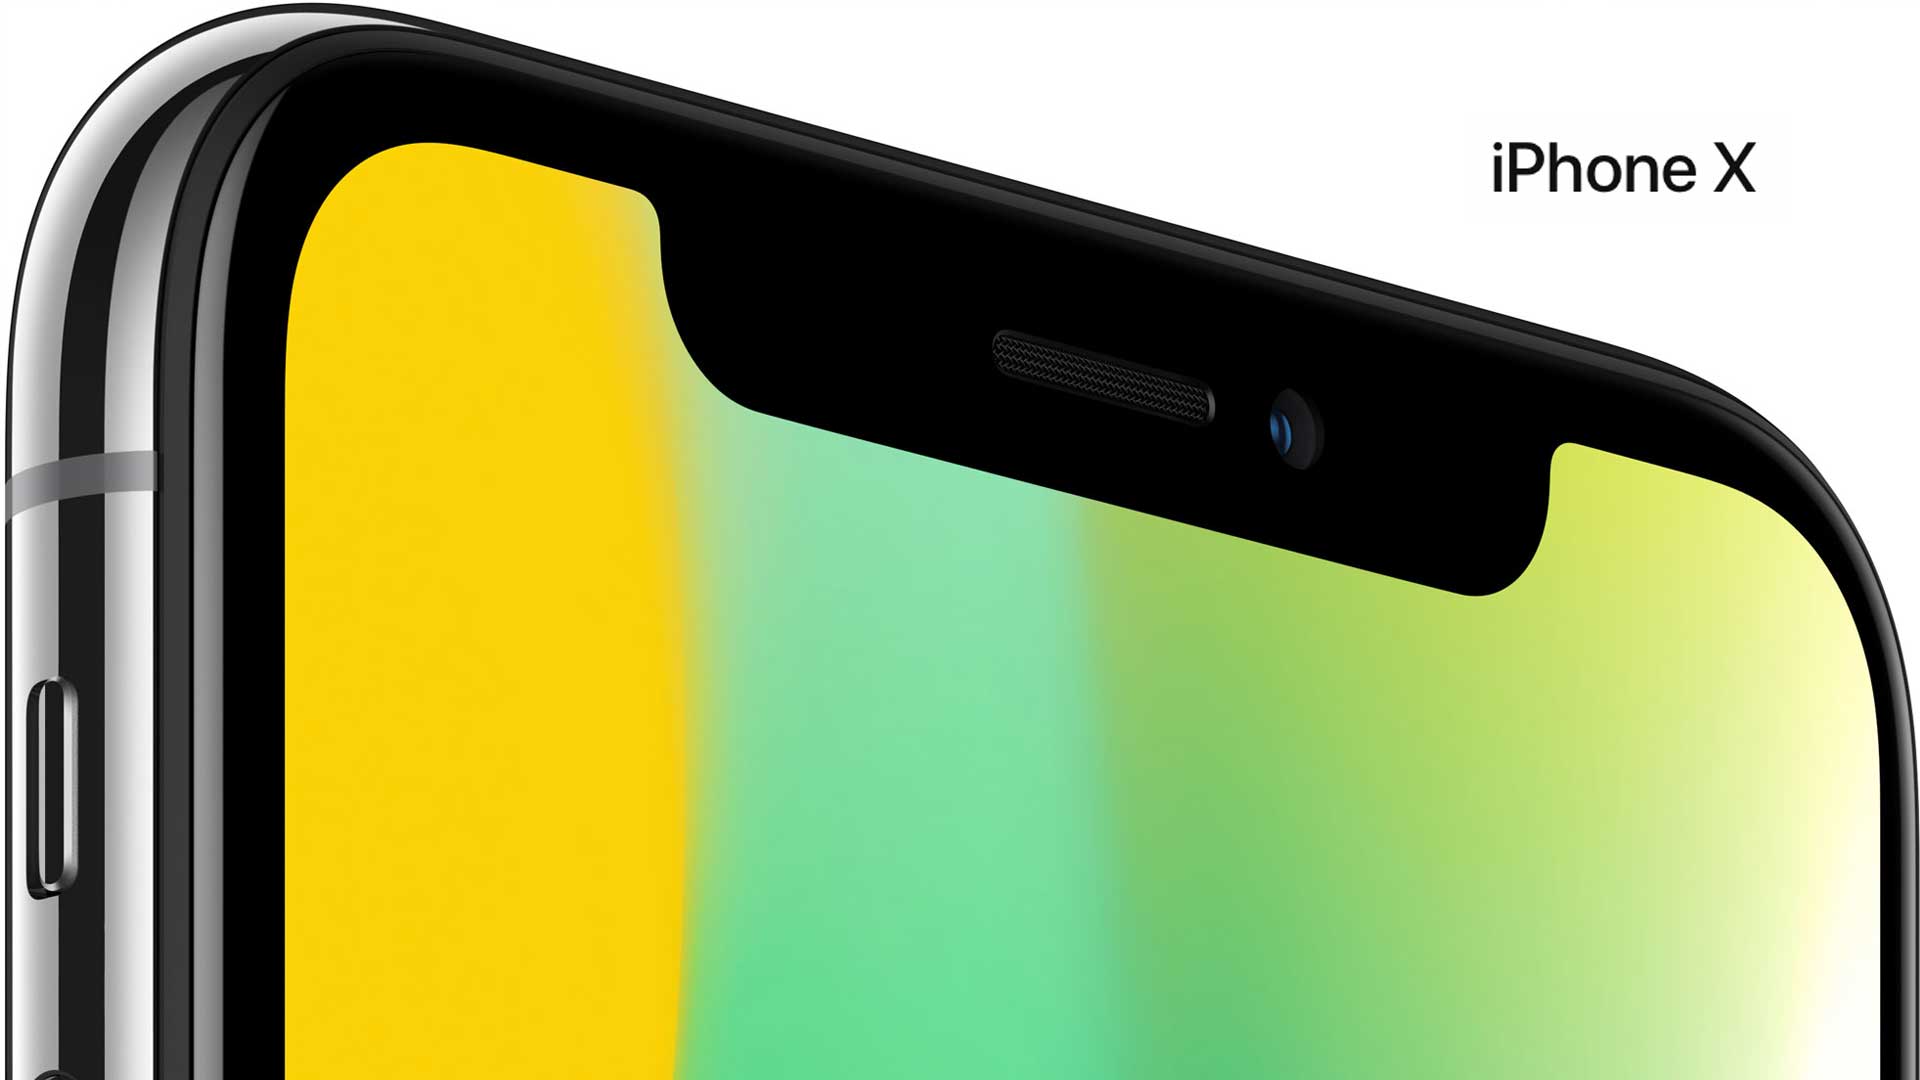 Do You Know About All Of These New iPhone X Features?